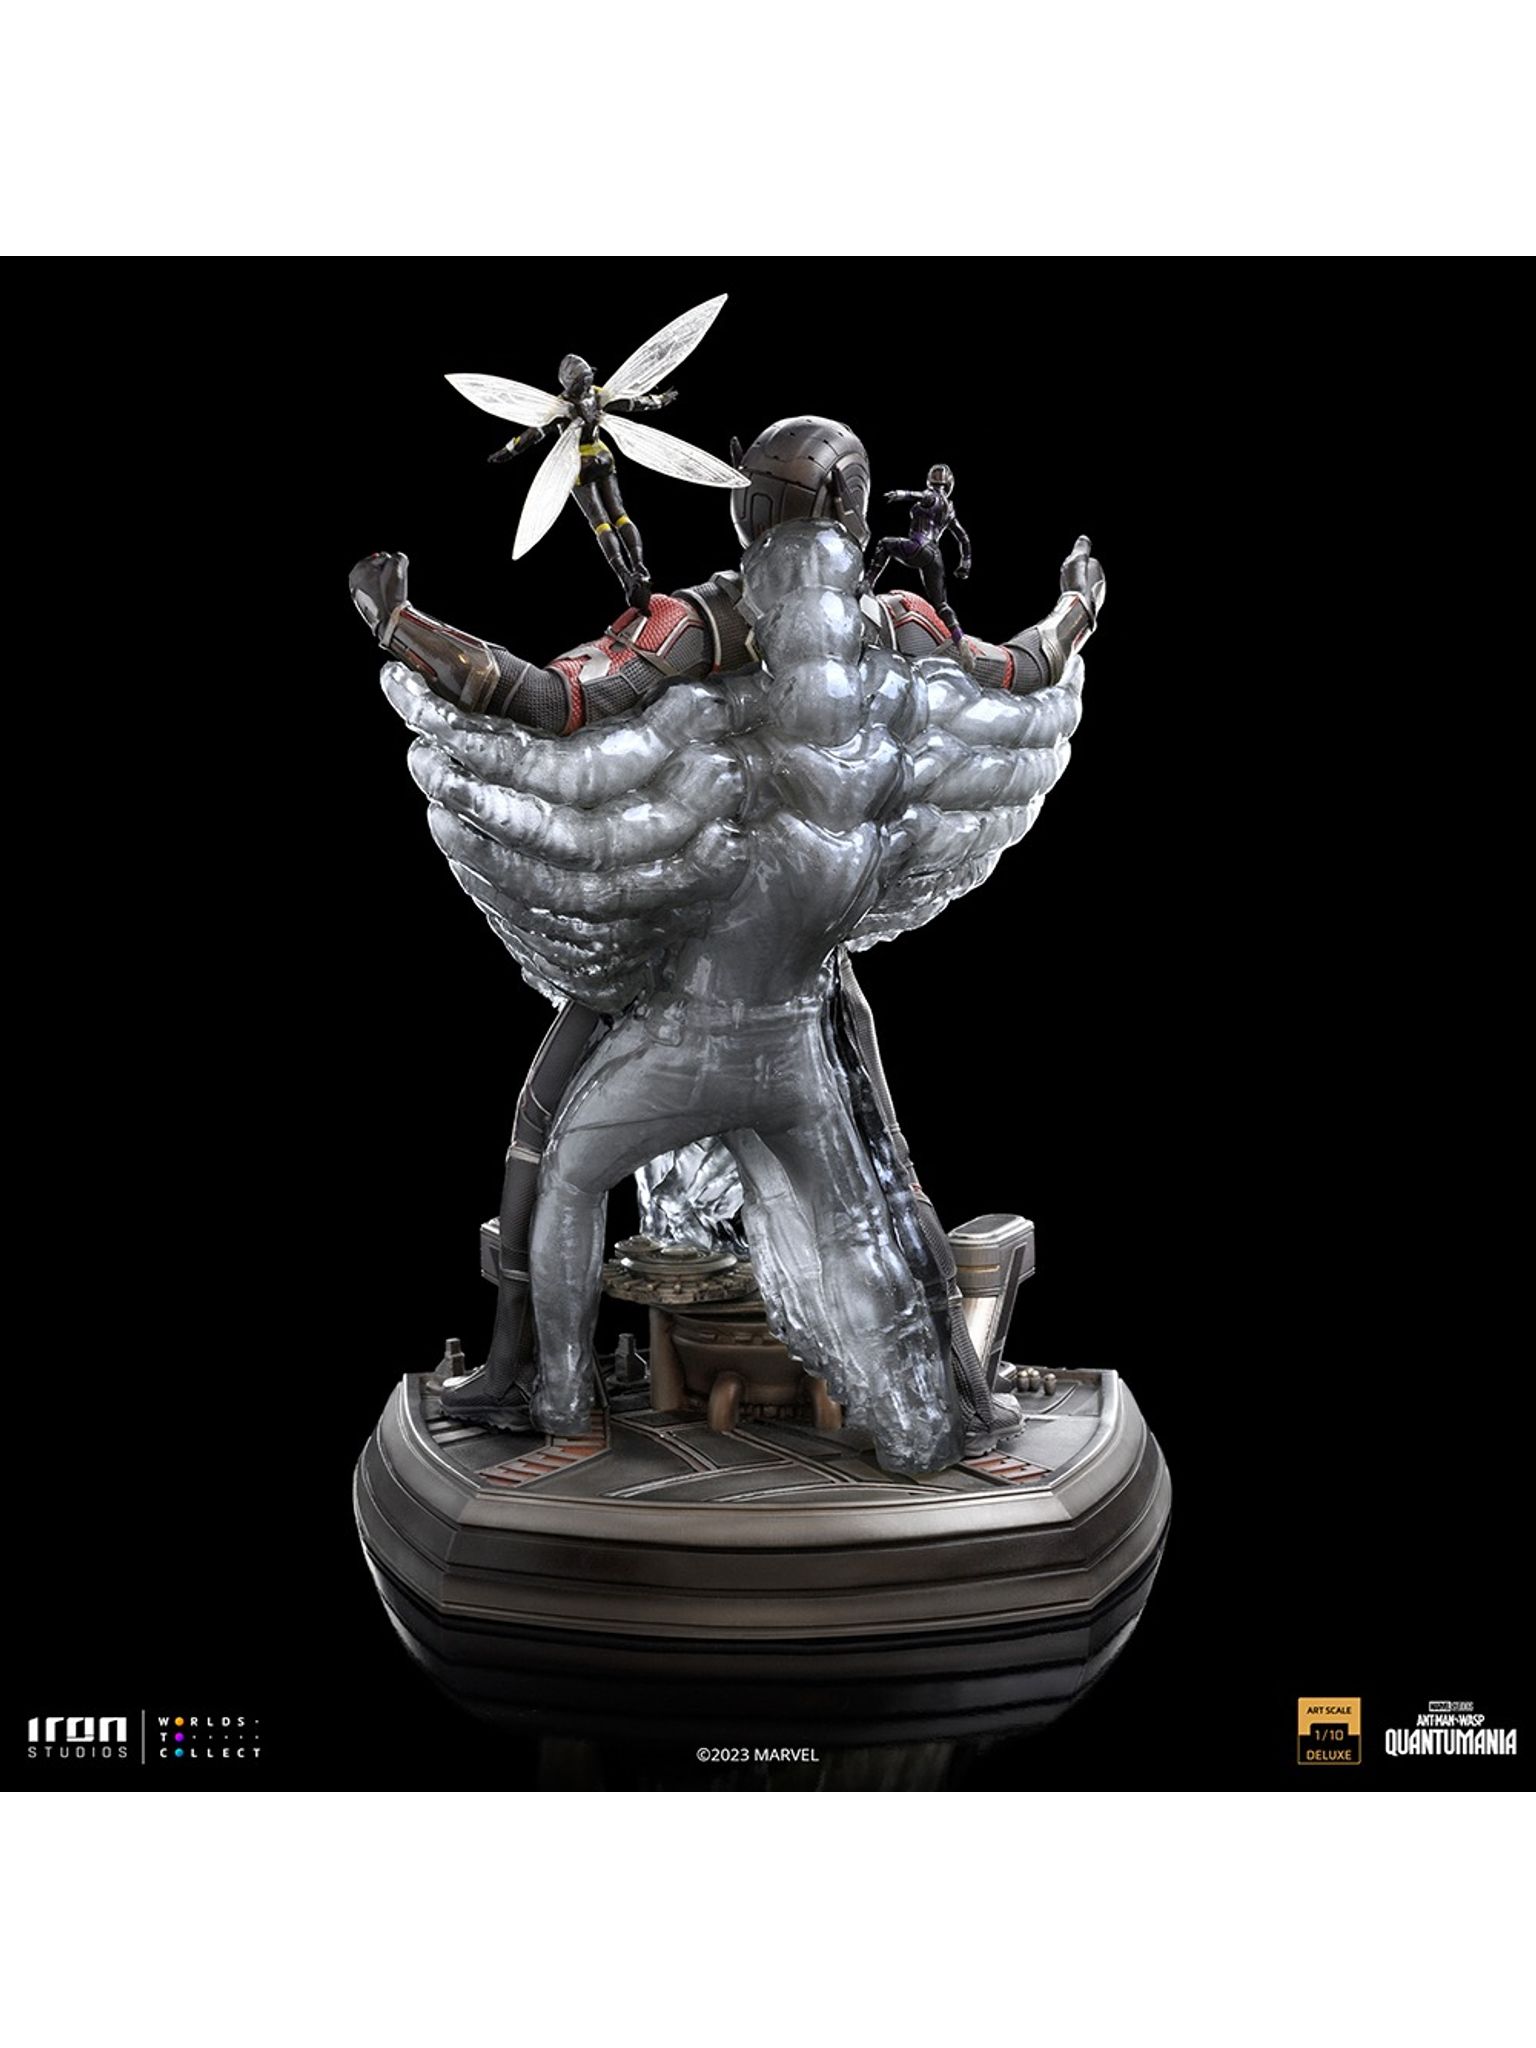 IRON STUDIOS : Ant-Man and the Wasp Quantumania - Statue Ant-Man and the Wasp - Art Scale 1/10 207882-1536-2048?v=638170908177270000&width=1536&height=2048&aspect=true